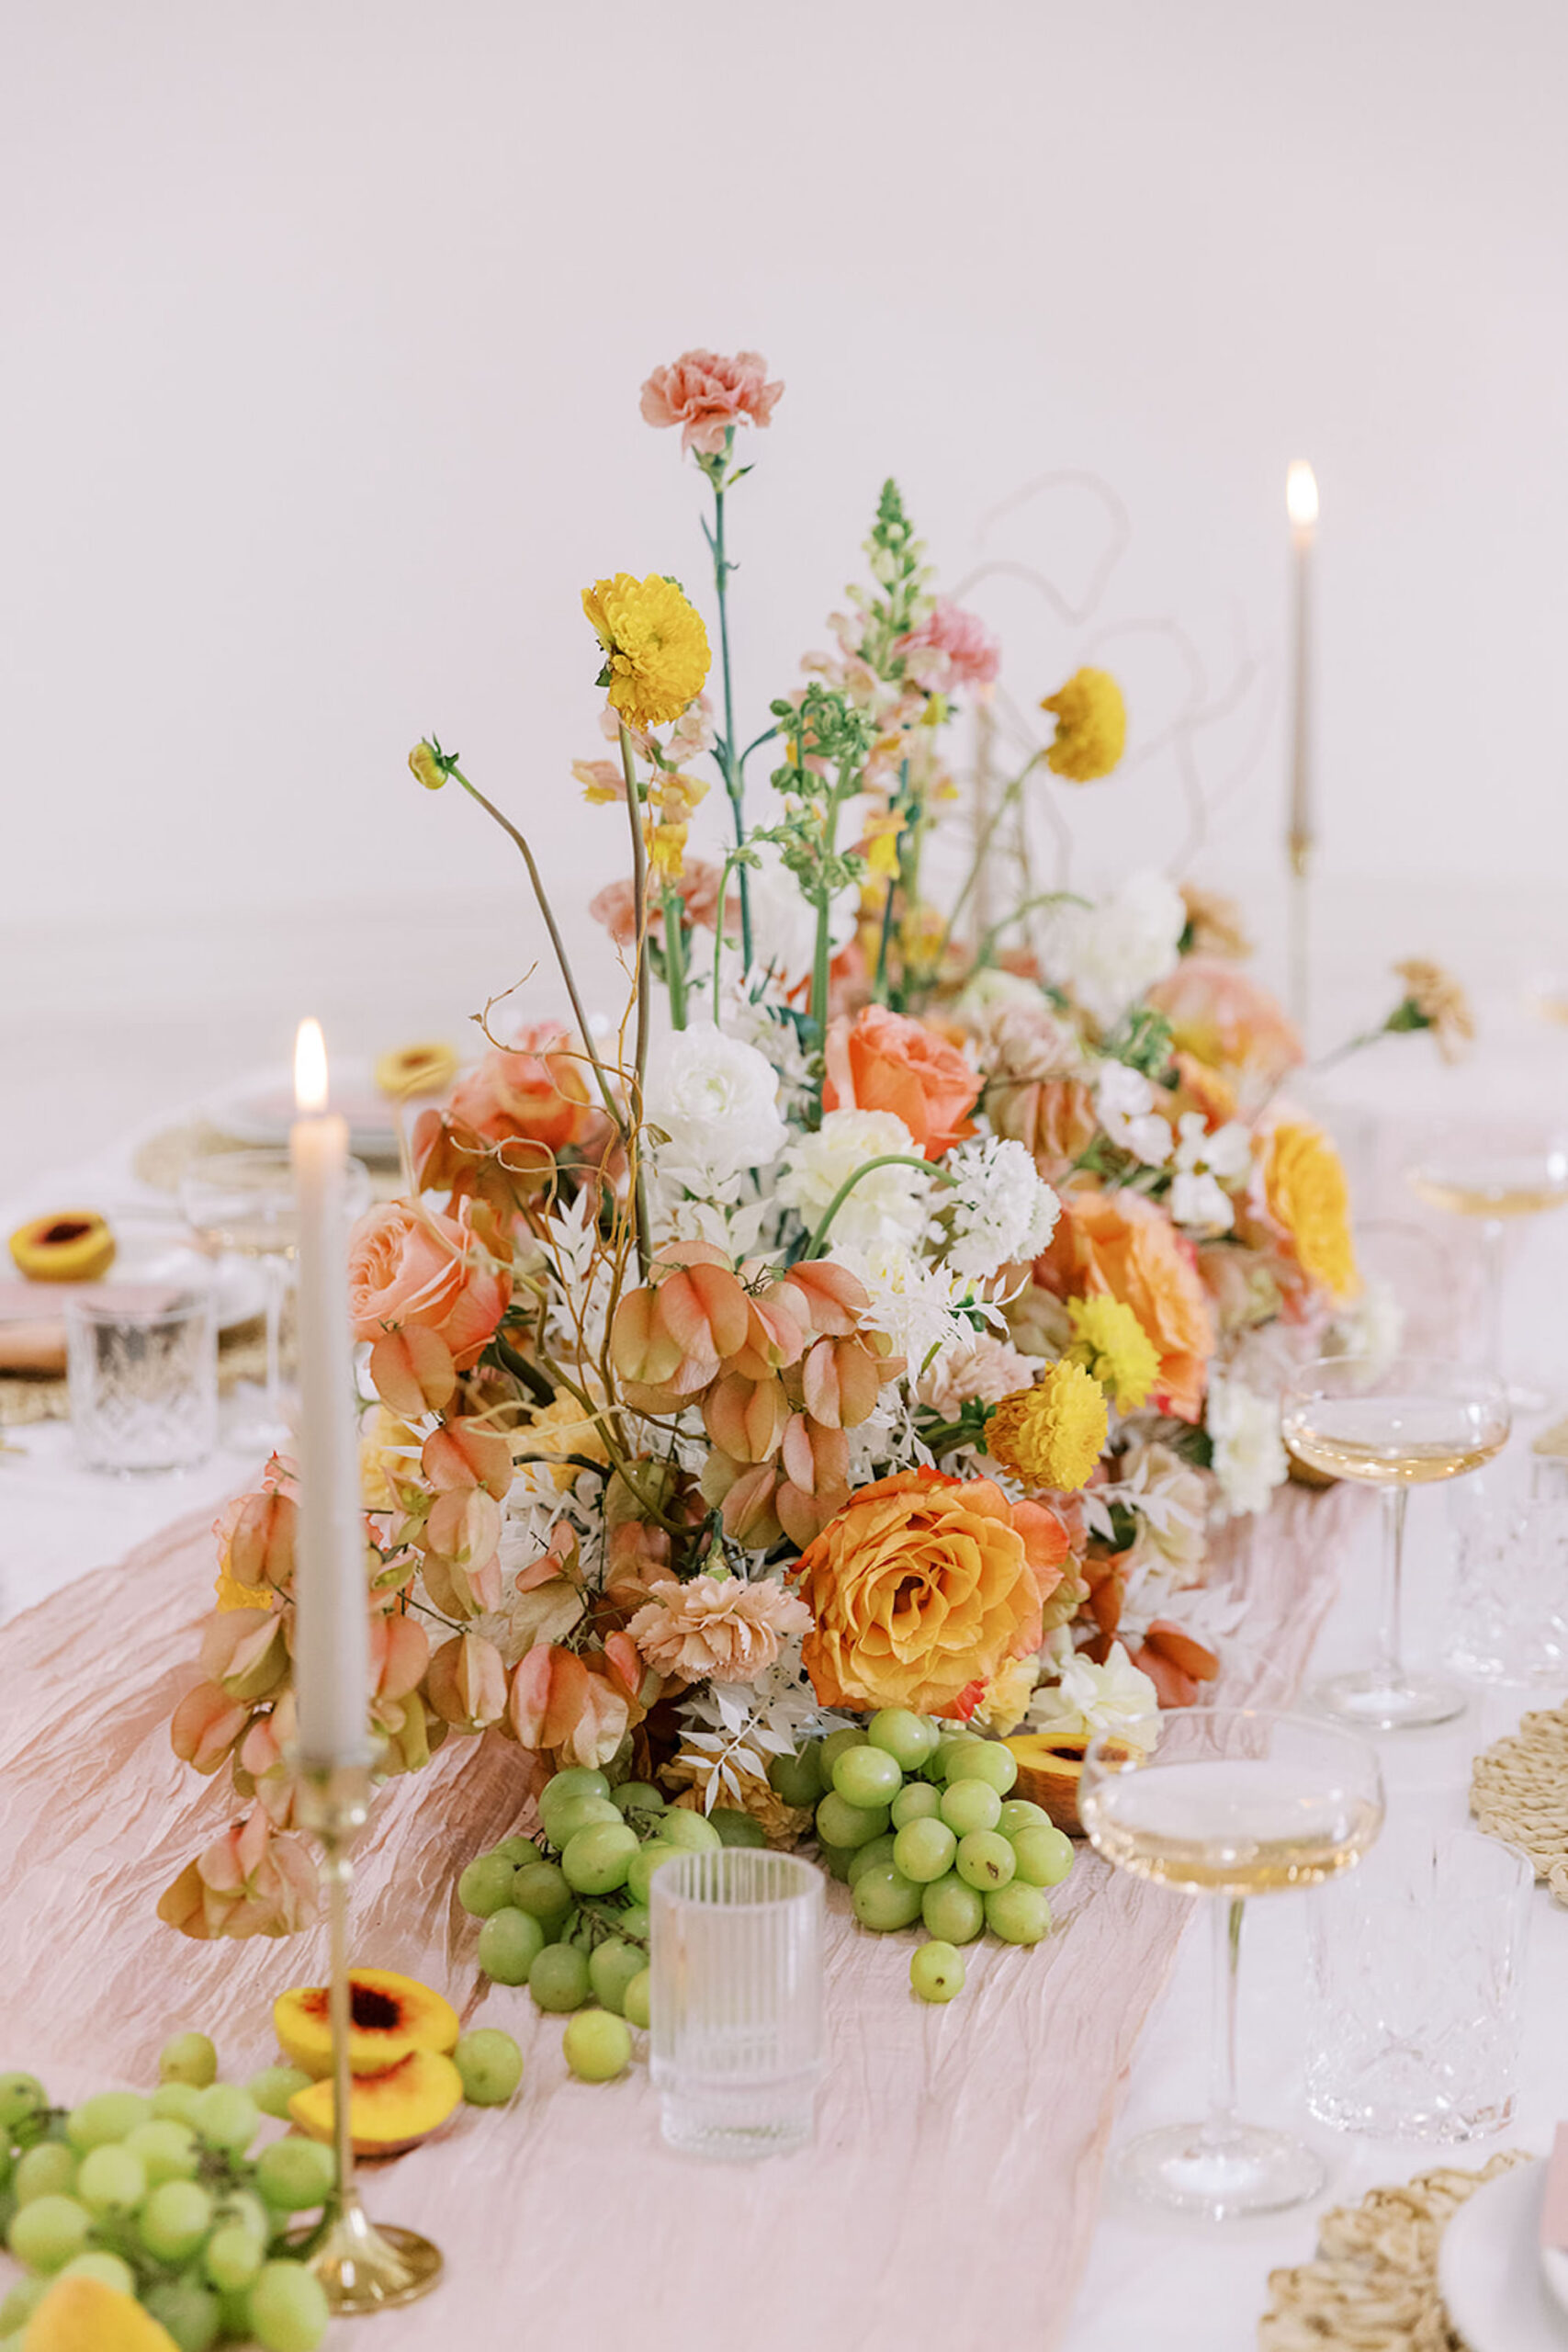 Romantic, Spring-Inspired White, Orange, Yellow, Peach Rose, Dahlias, and Carnation Centerpiece Ideas | Taper Candle with Gold Holder Wedding Reception Inspiration